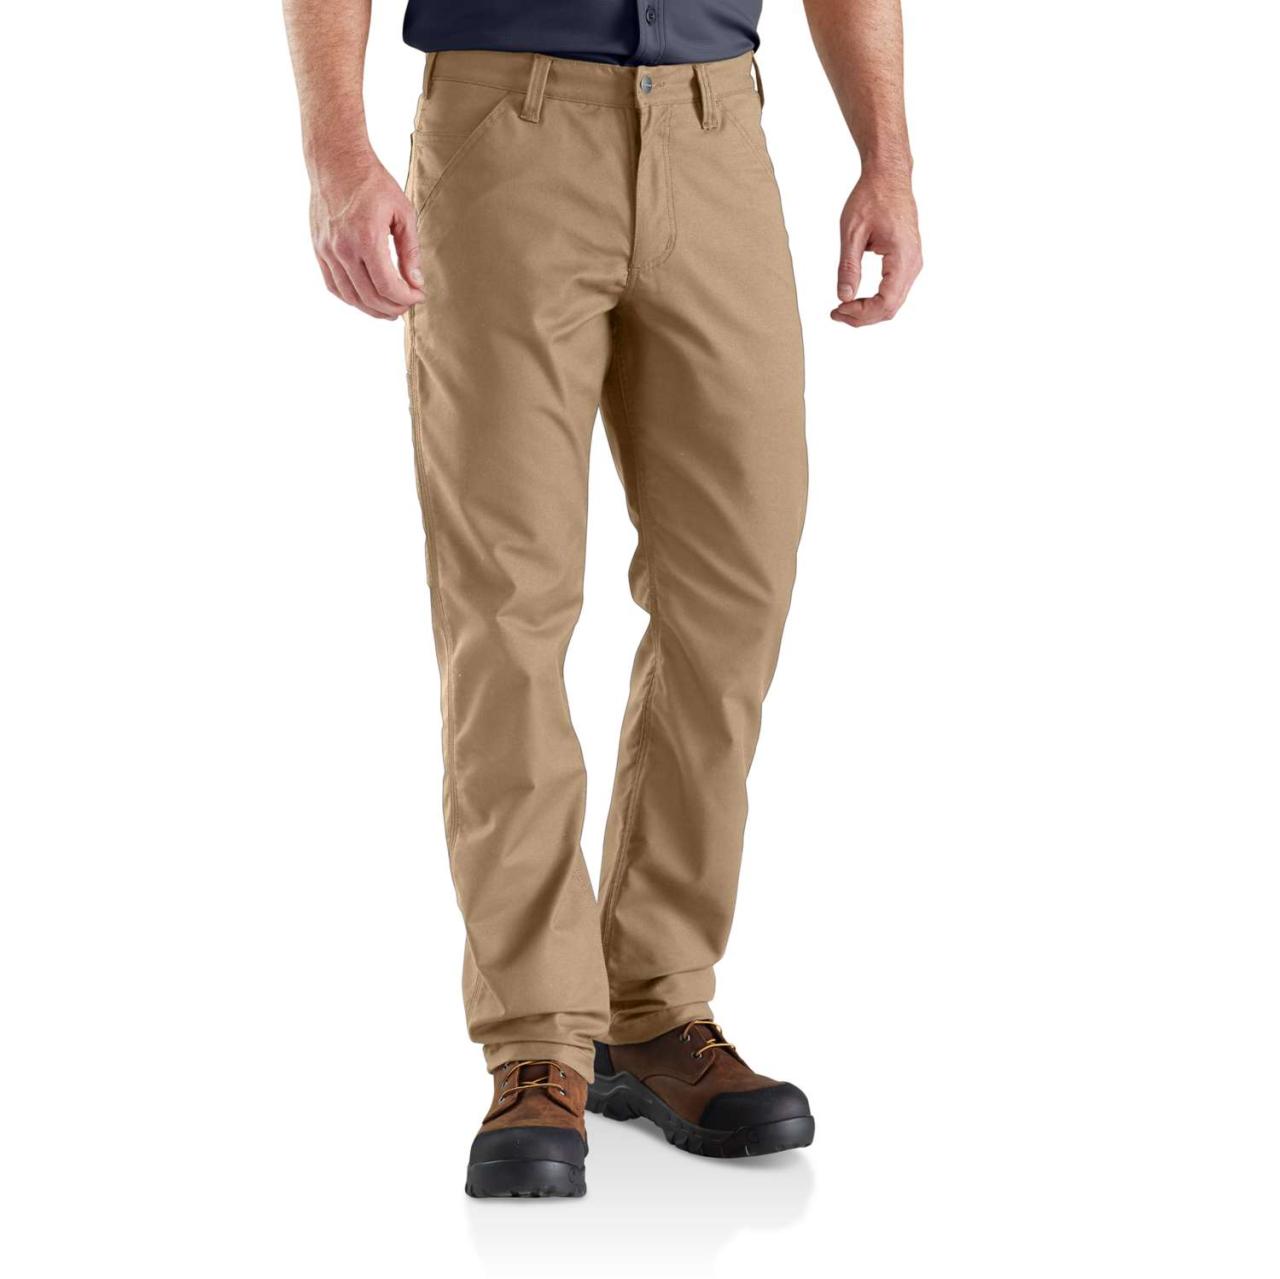 Rugged Stretch Canvas Pant - Pharsol Protect - Workwear